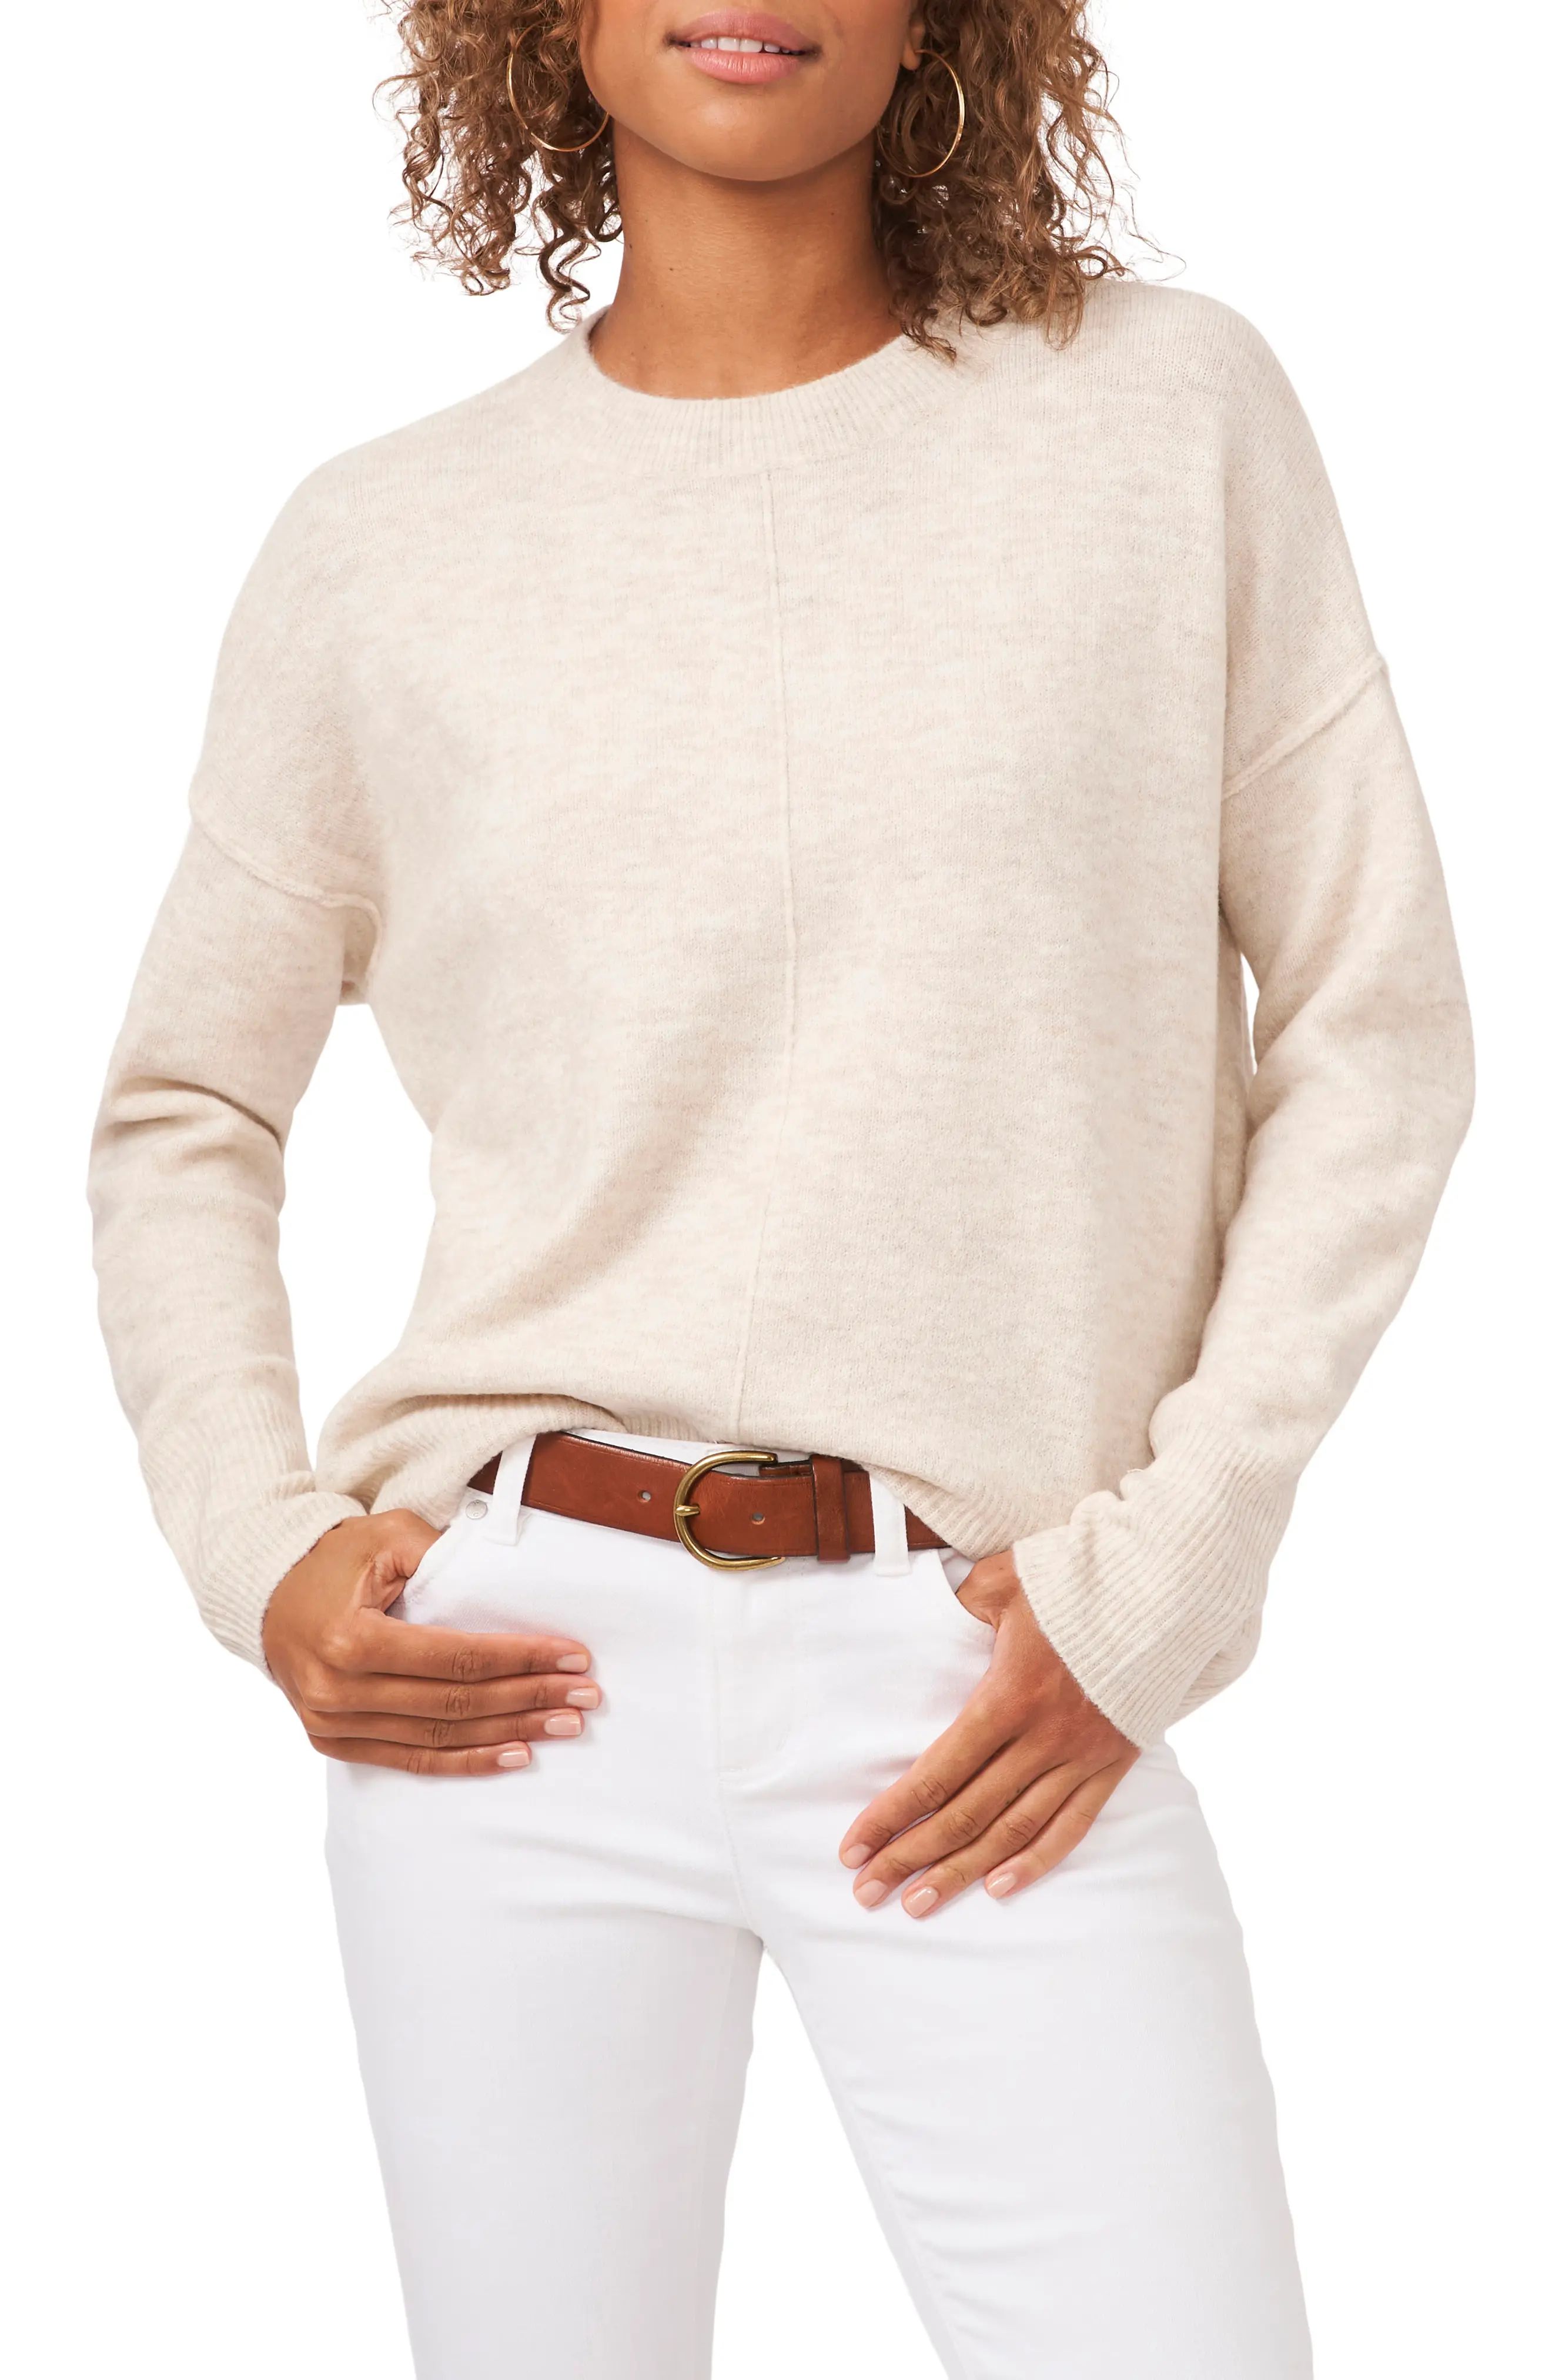 Vince Camuto Center Seam Crewneck Sweater, Size X-Small in Malted Brown at Nordstrom | Nordstrom